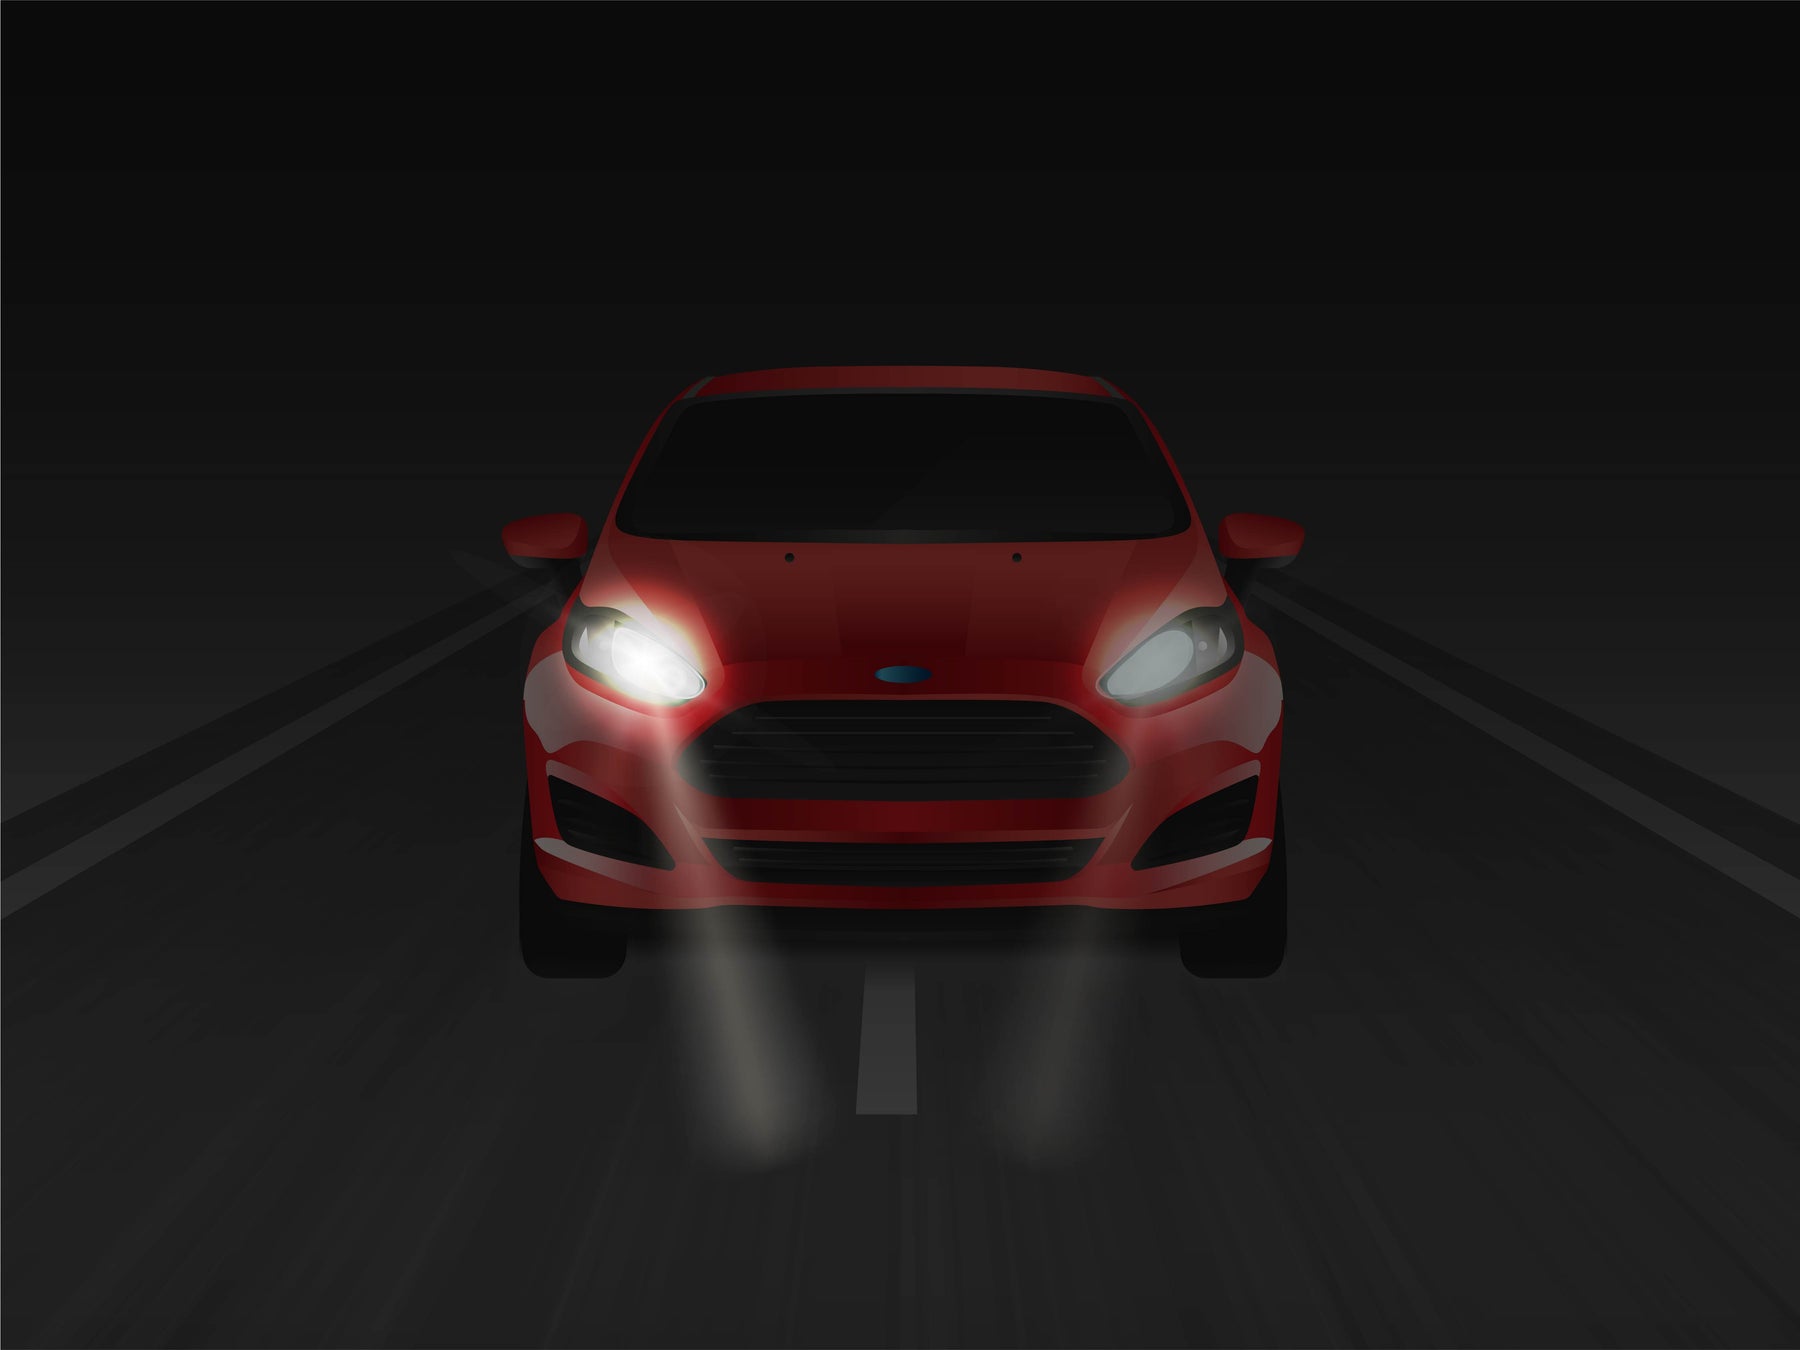 Red car driving on road at night, with headlights on 